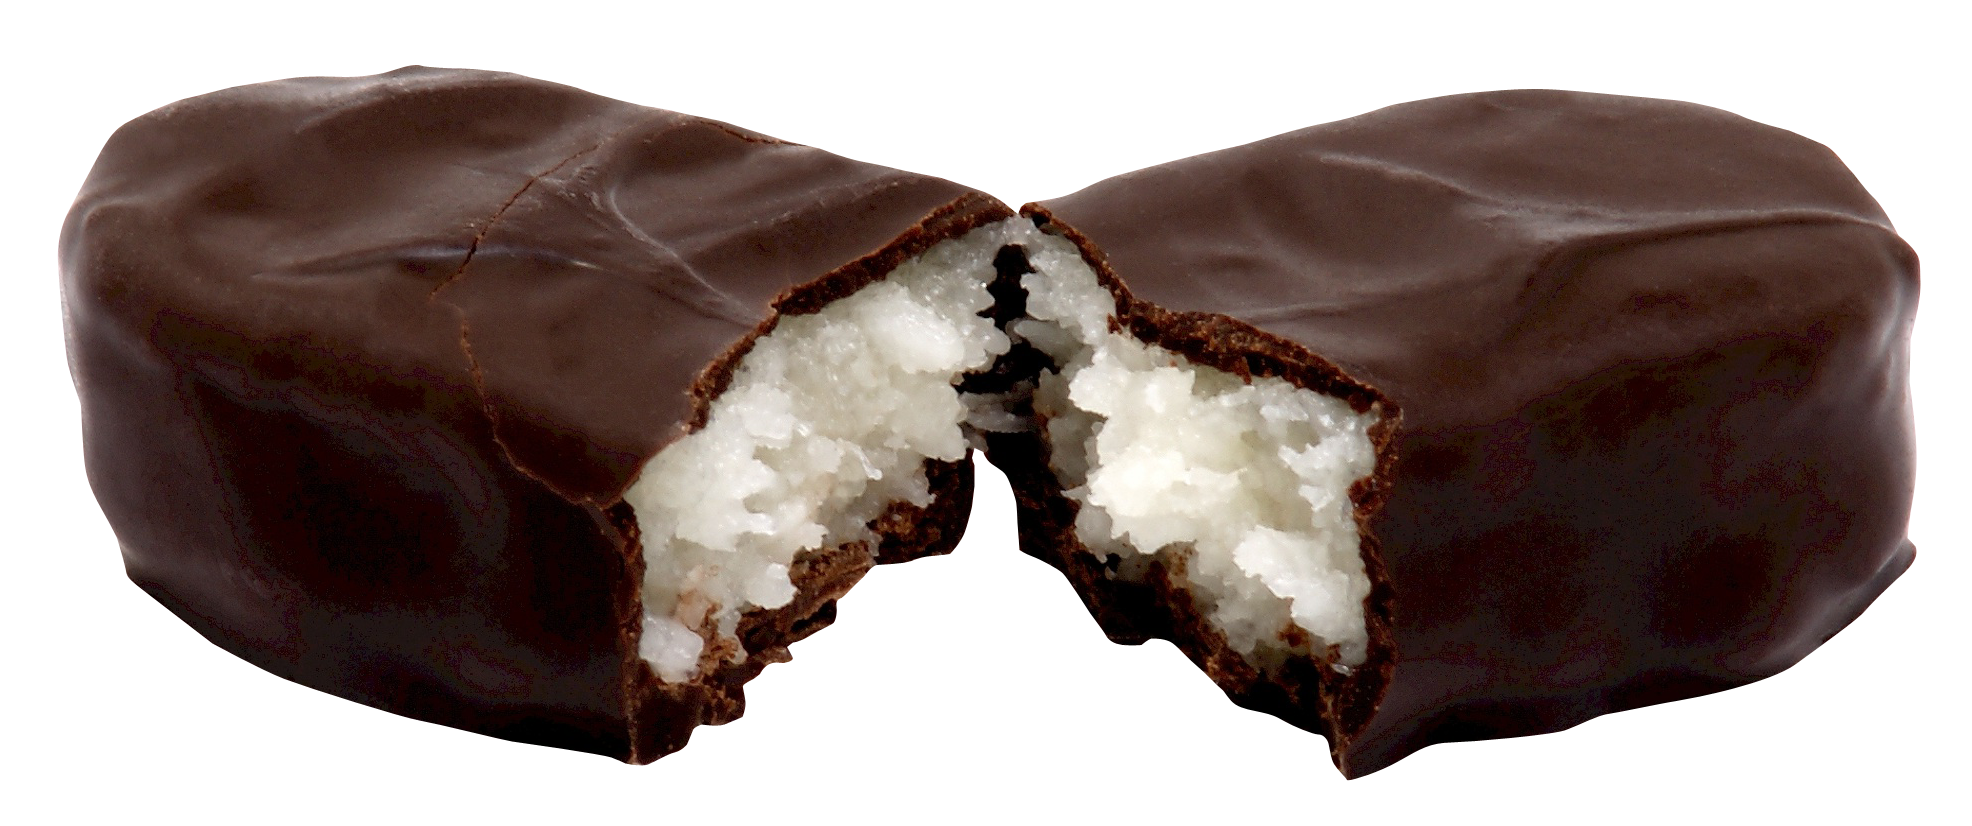 A Chocolate Bar With A White Filling